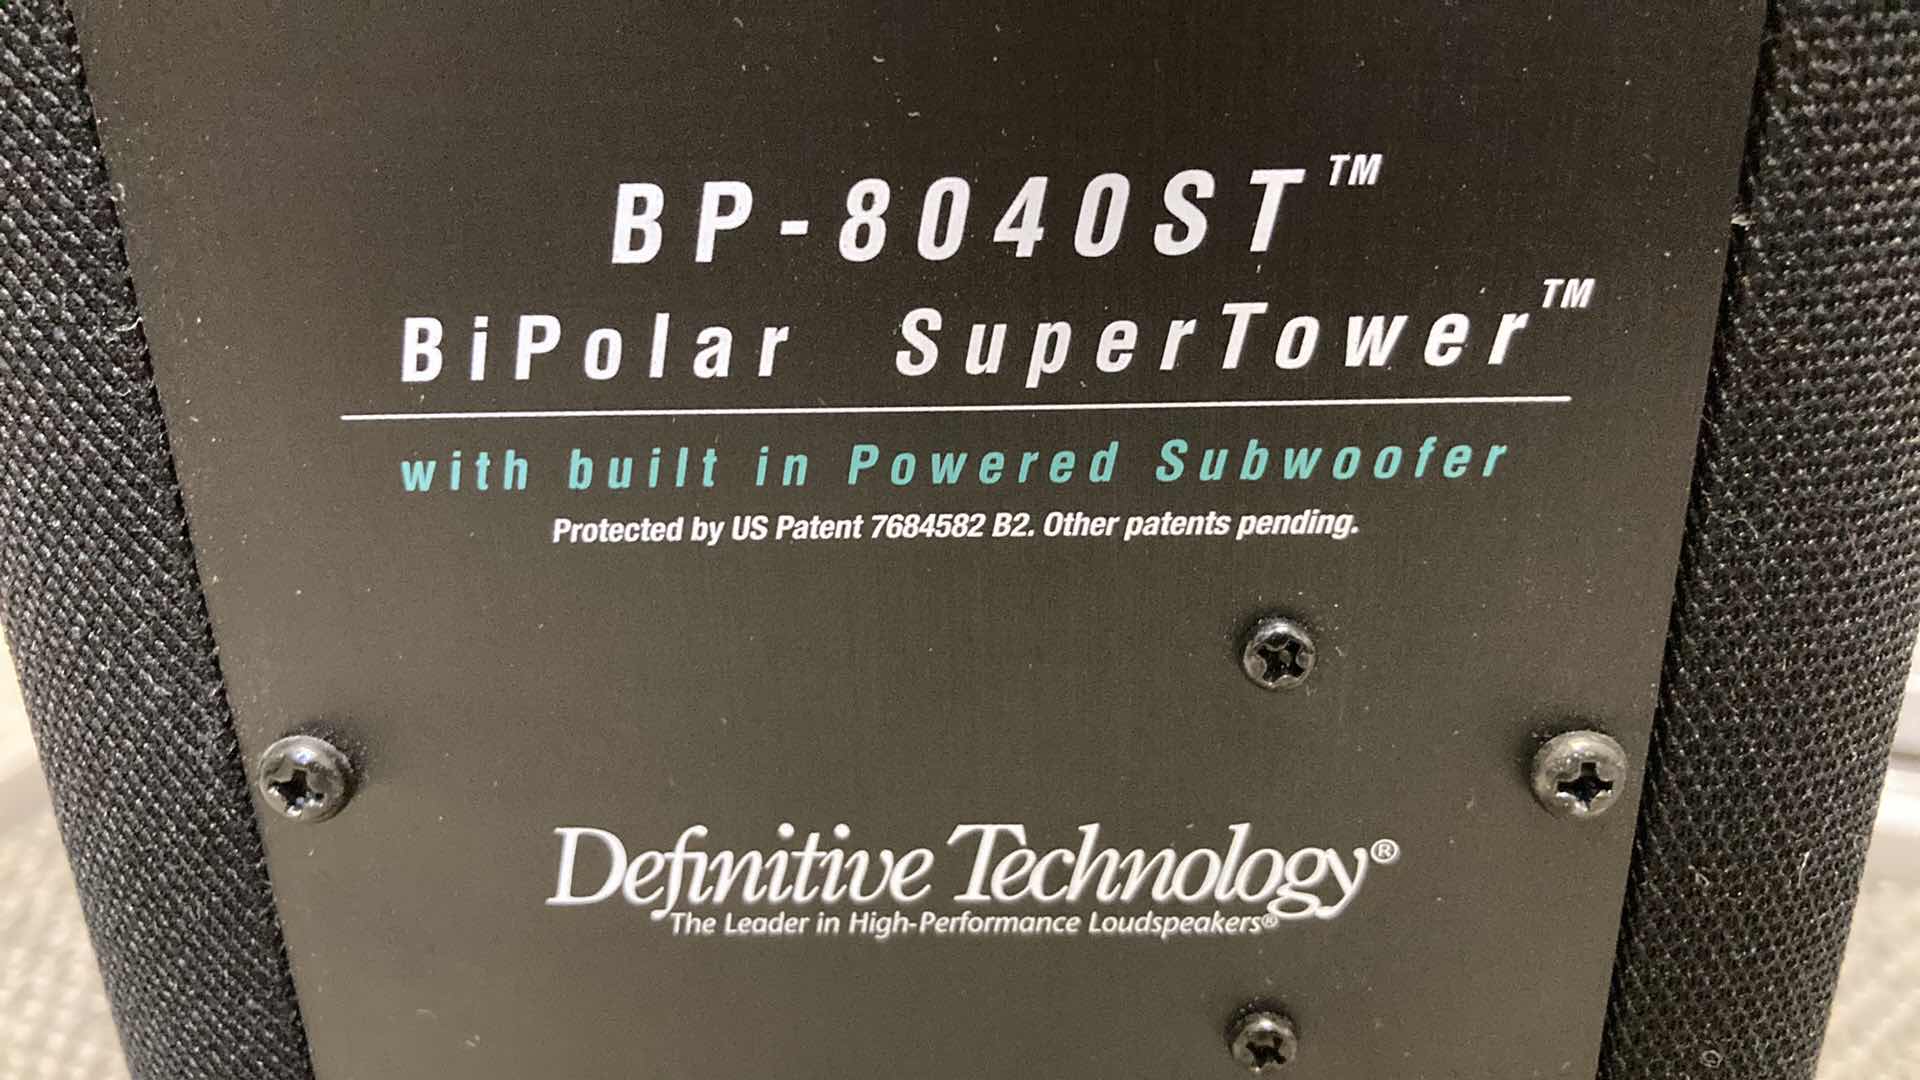 Photo 6 of DEFINITIVE TECHNOLOGY BIPOLAR SUPER TOWER W POWERED SUBWOOFER MODEL BP-8040ST